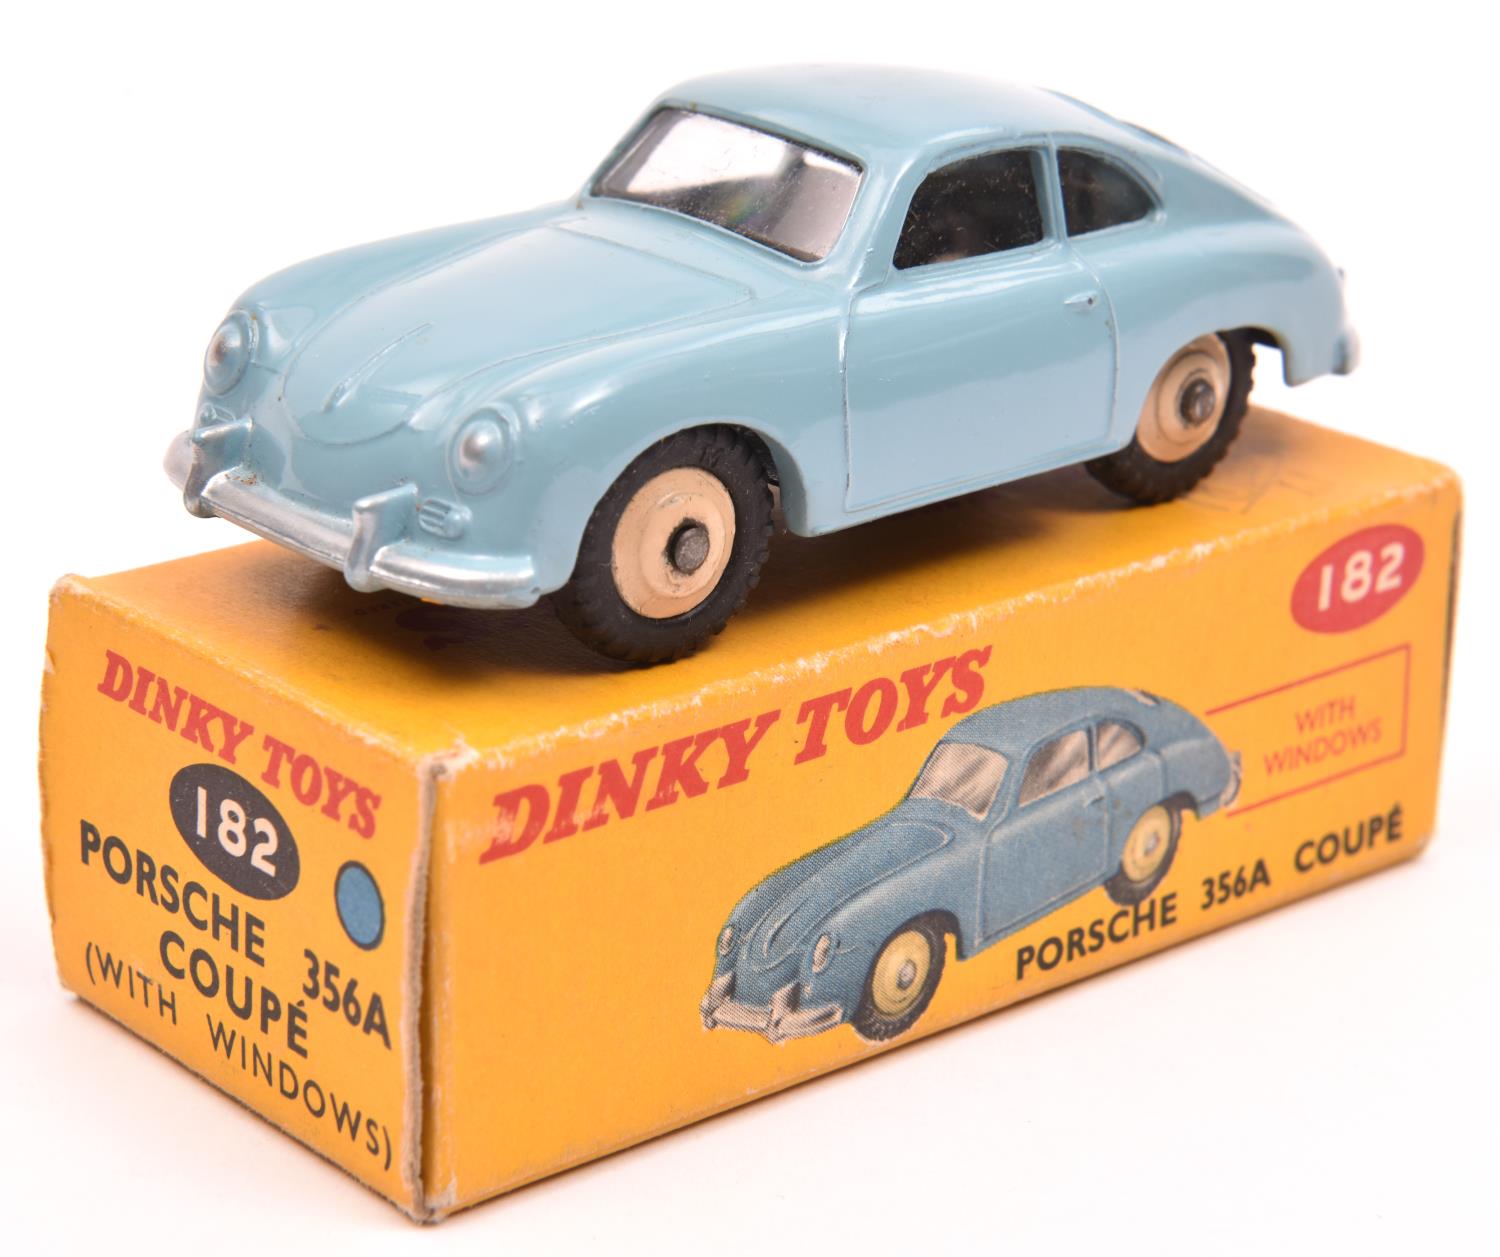 Dinky Toys Porsche 356A Coupe (182). An example in light blue with cream wheels and black treaded